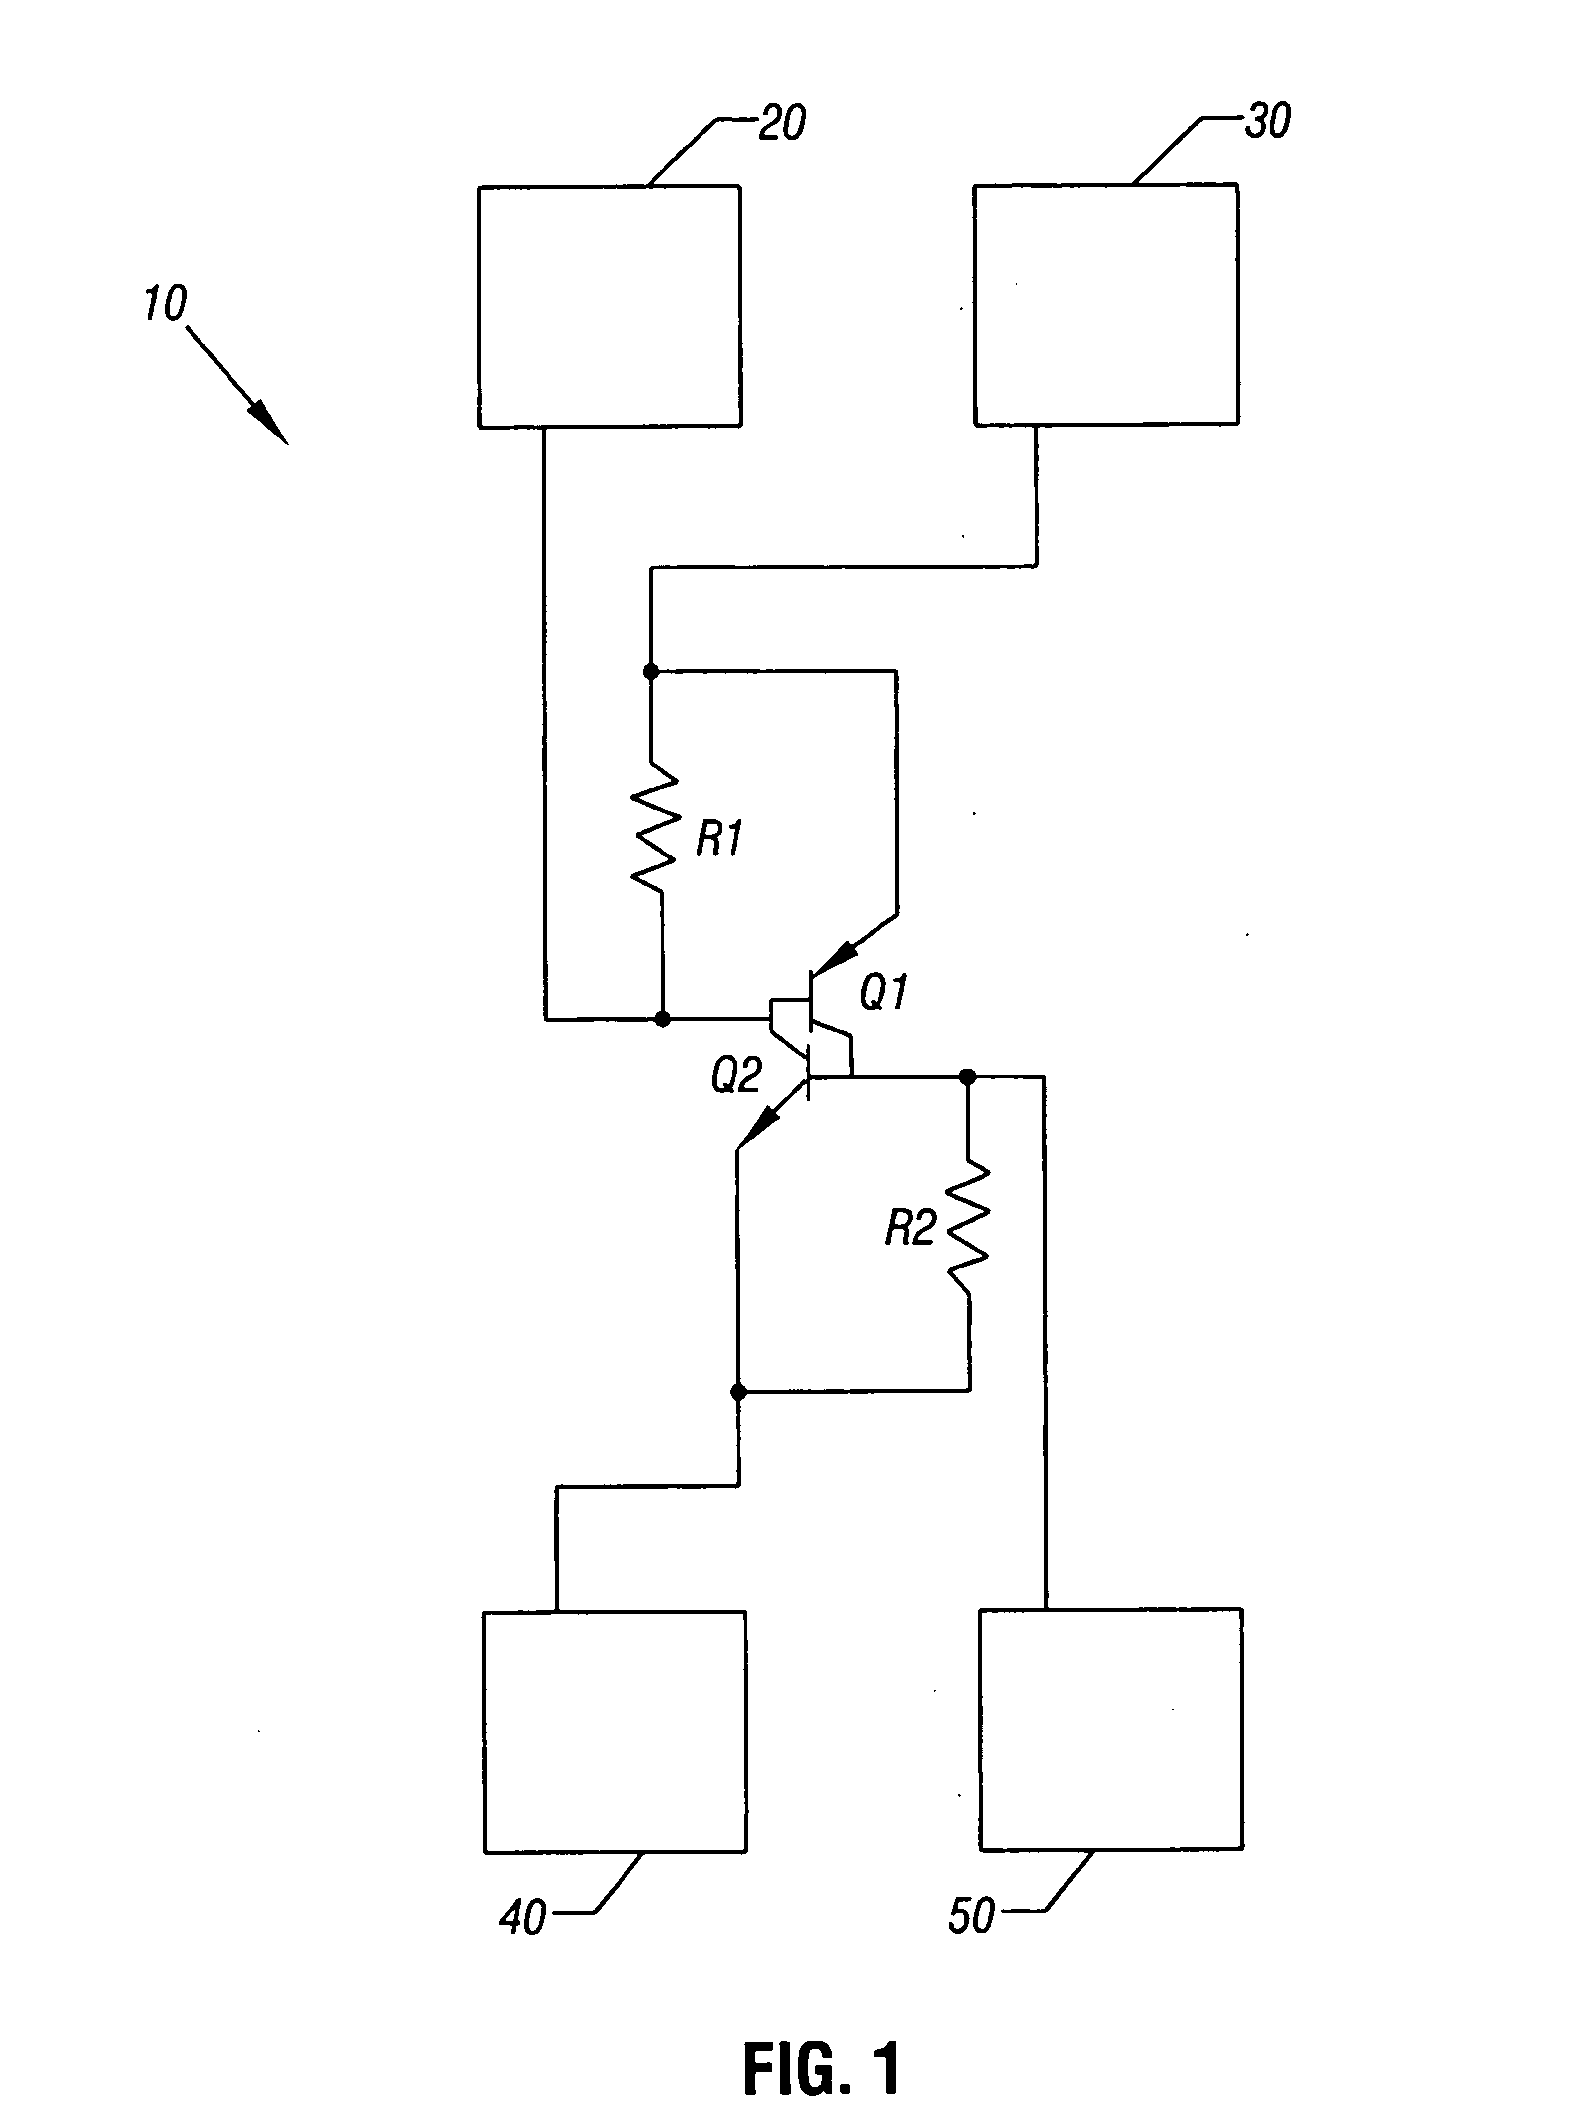 Silicon controlled rectifier protection circuit